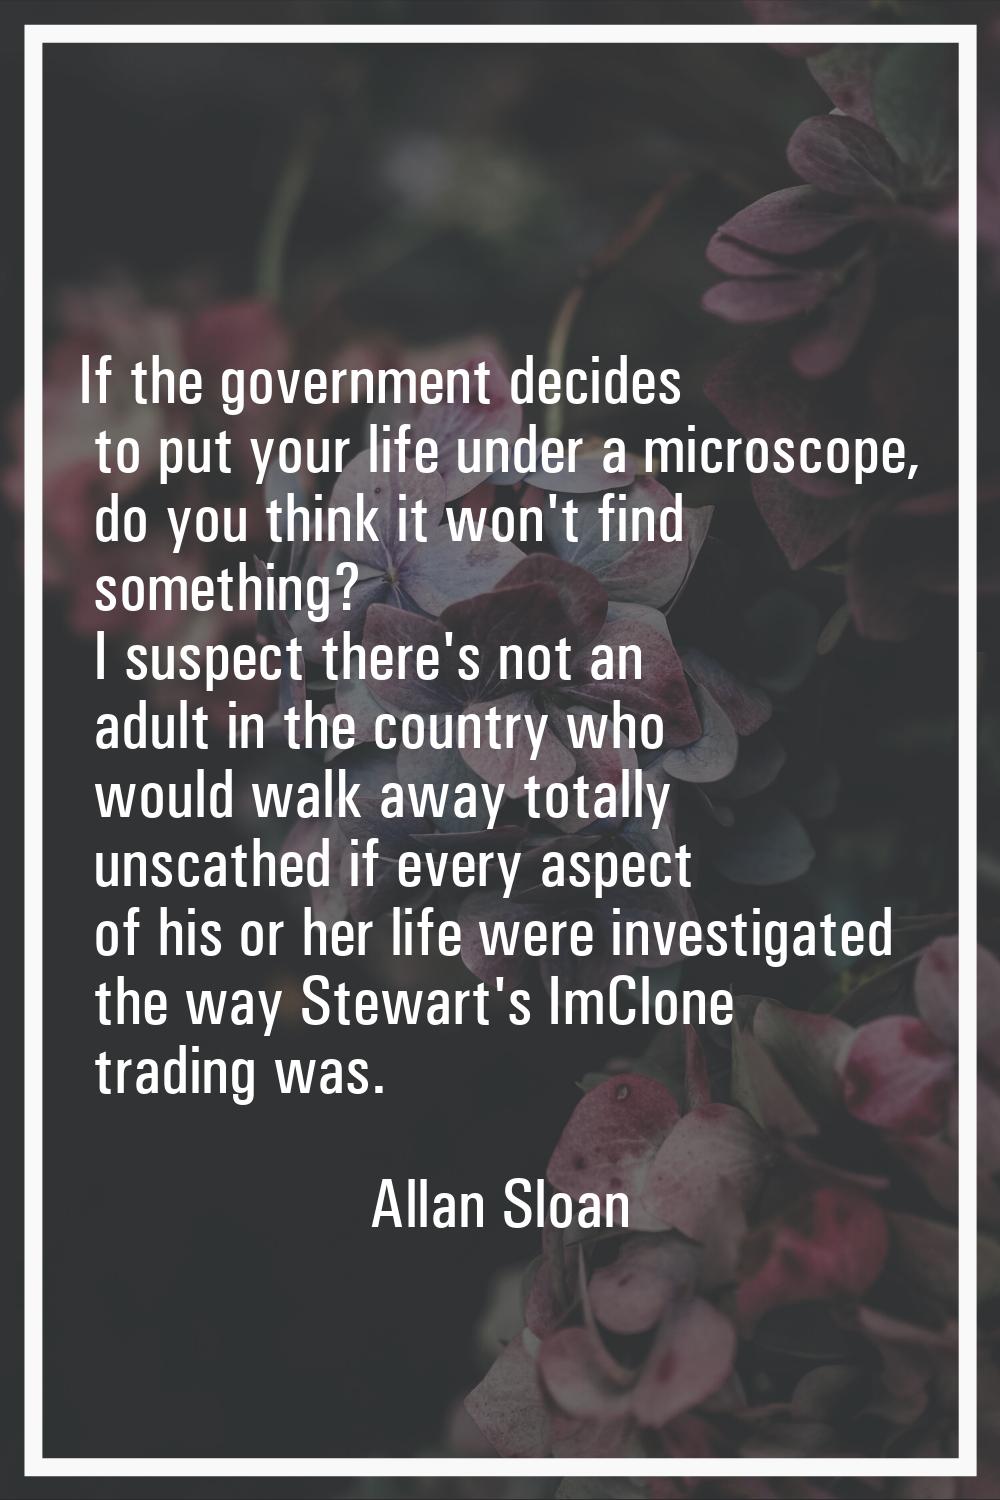 If the government decides to put your life under a microscope, do you think it won't find something